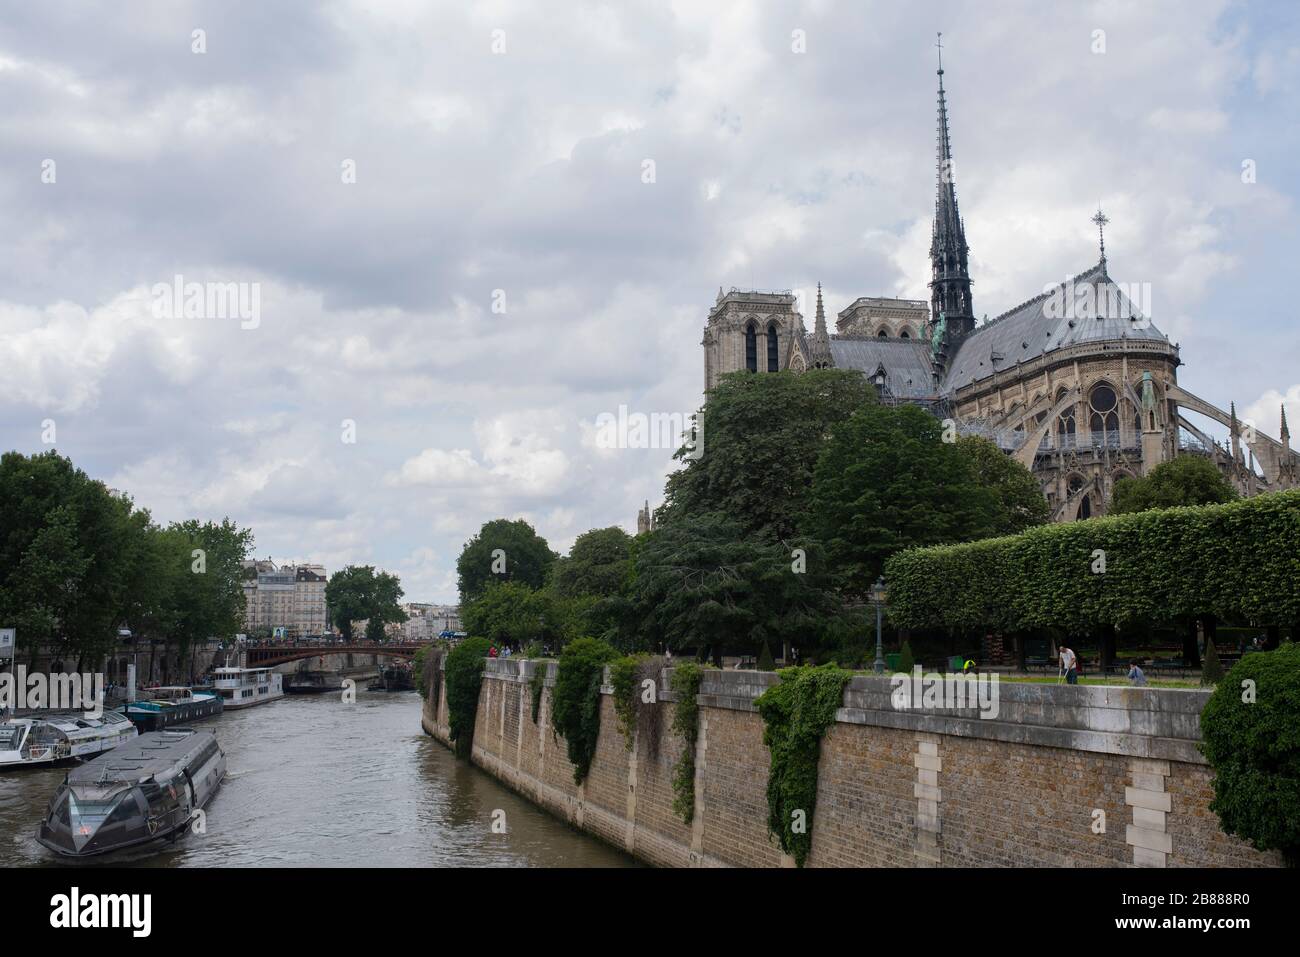 Notre Dame cathedral and Seine river in Paris, France. Dark heaven. Notre Dame view before fire. Travel locations in France, Europe Stock Photo